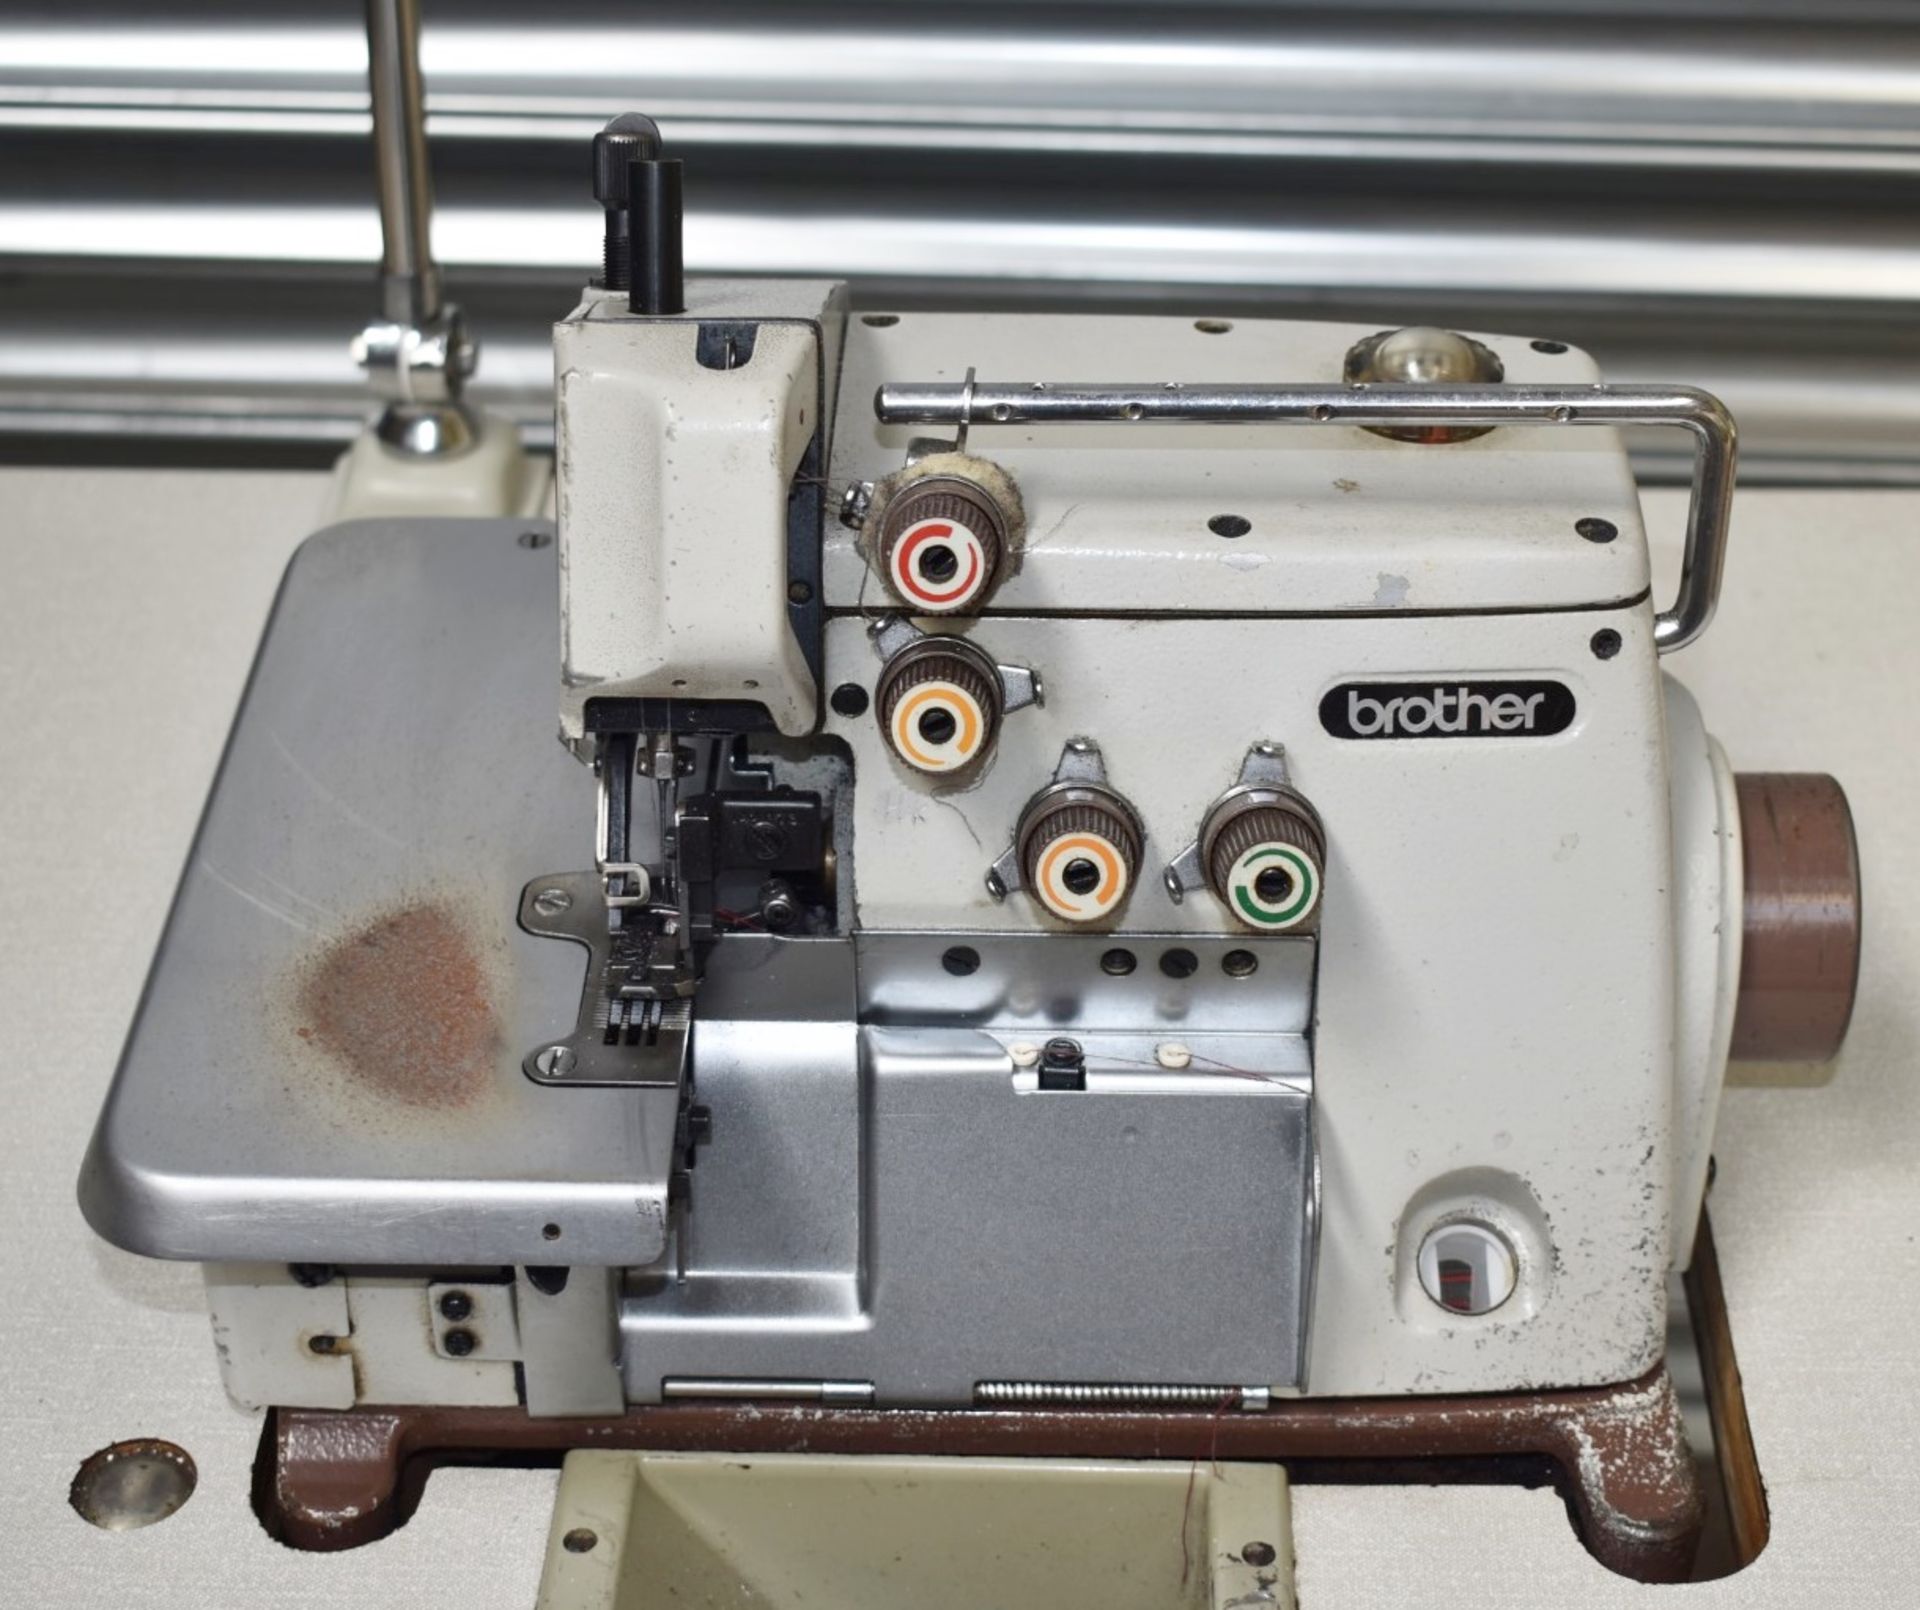 1 x Brother 3 Thread Overlock Industrial Sewing Machine - Model EF4-B511 - Image 15 of 27